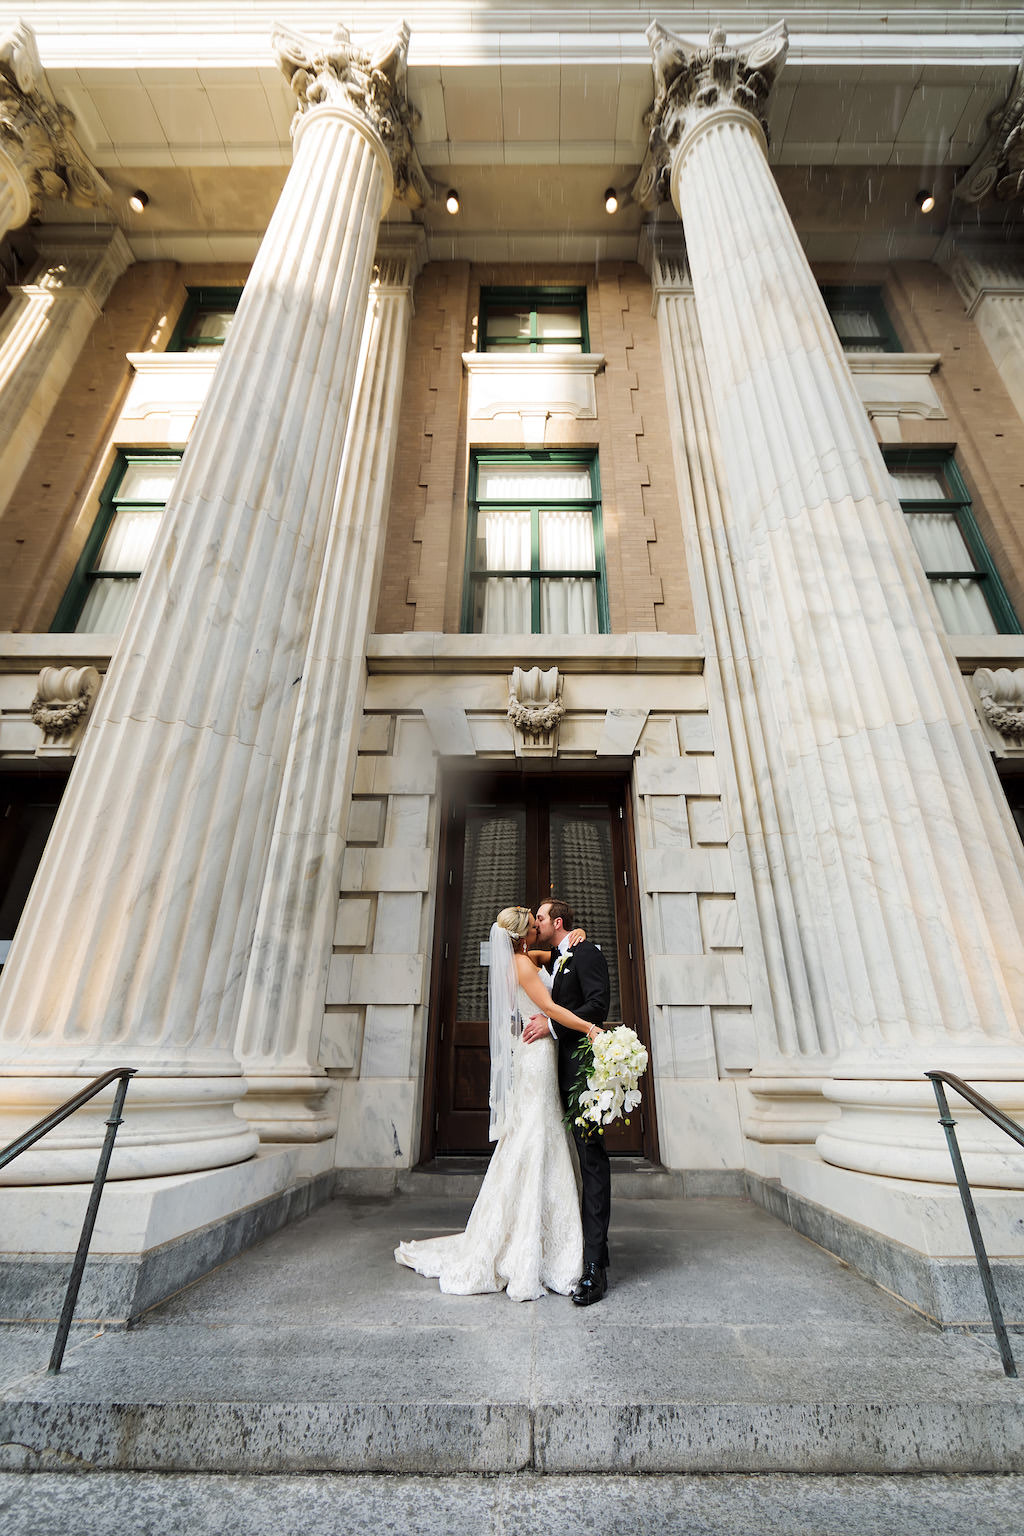 Outdoor Bride and Groom Wedding Ceremony on Front Steps of Historic Courthouse | Downtown Tampa Hotel Venue Le Meridien